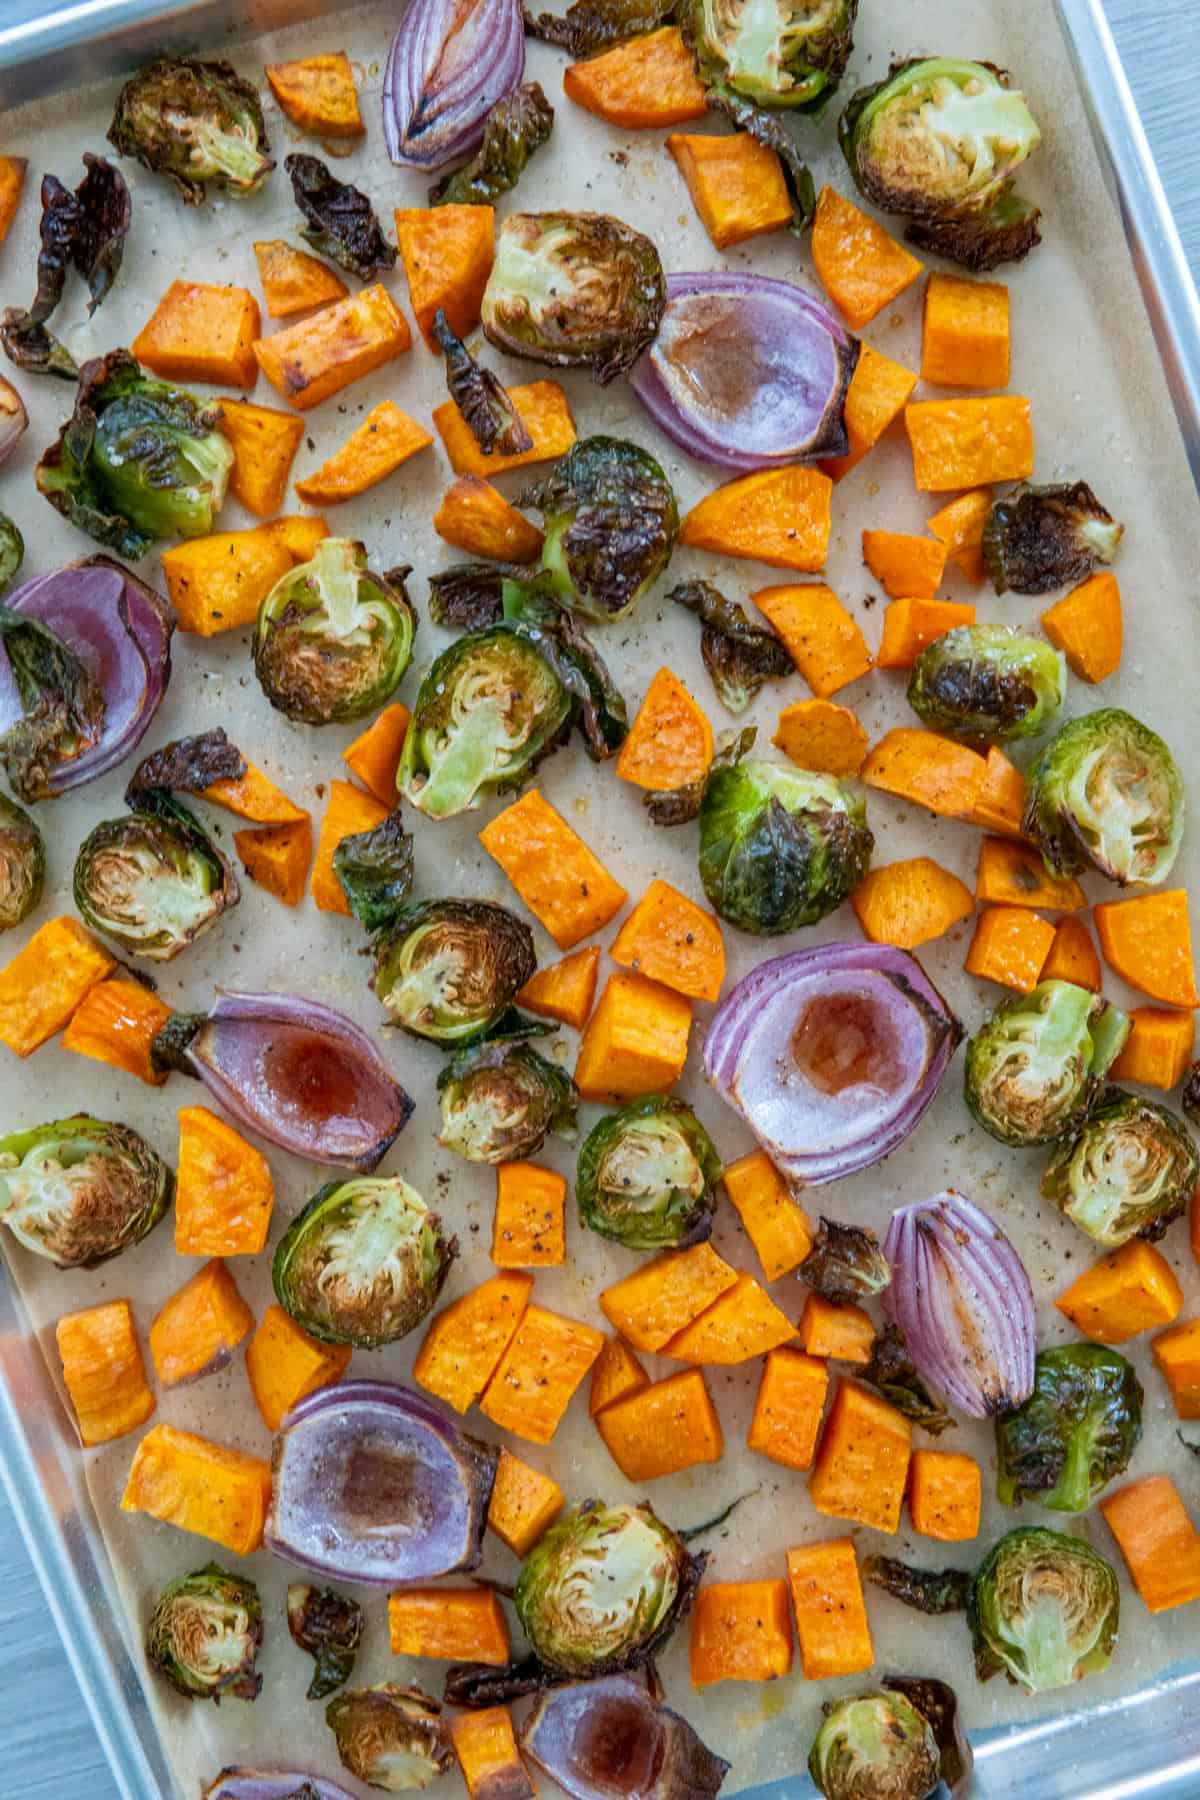 Red onions, sweet potatoes, and brussel sprouts on a baking sheet.